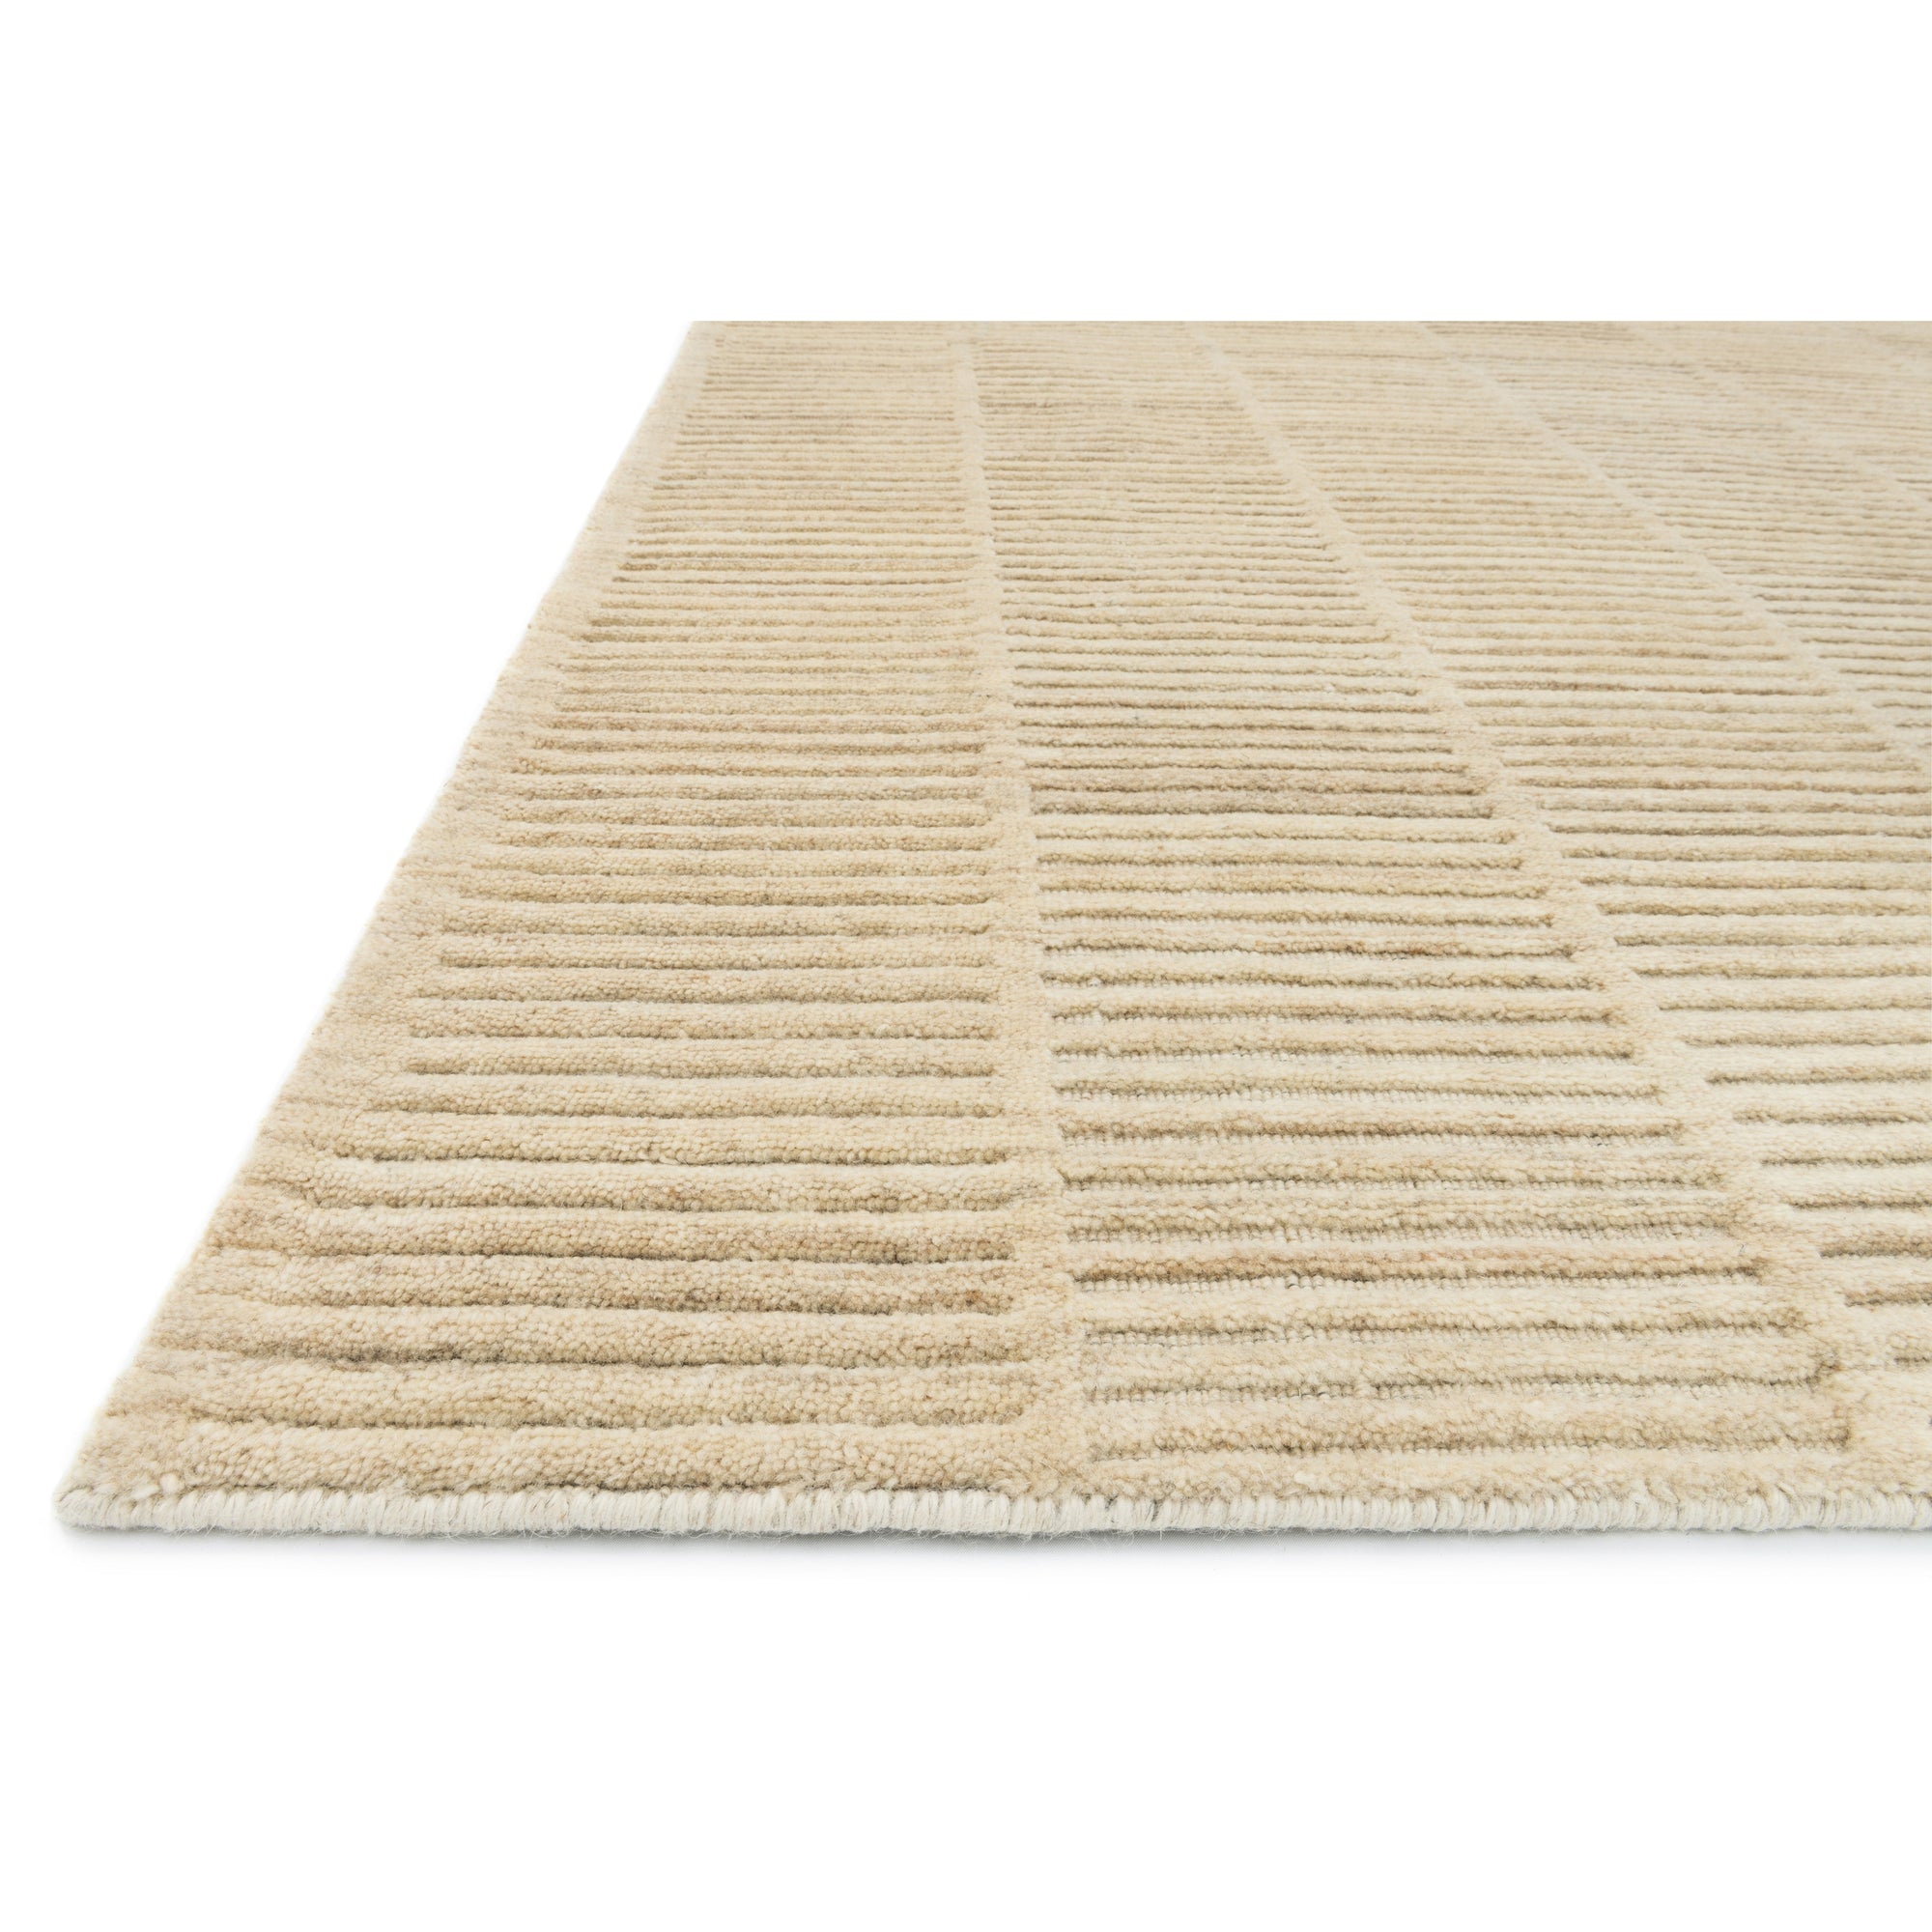 Rugs by Roo Loloi Hadley Natural Area Rug in size 18" x 18" Sample